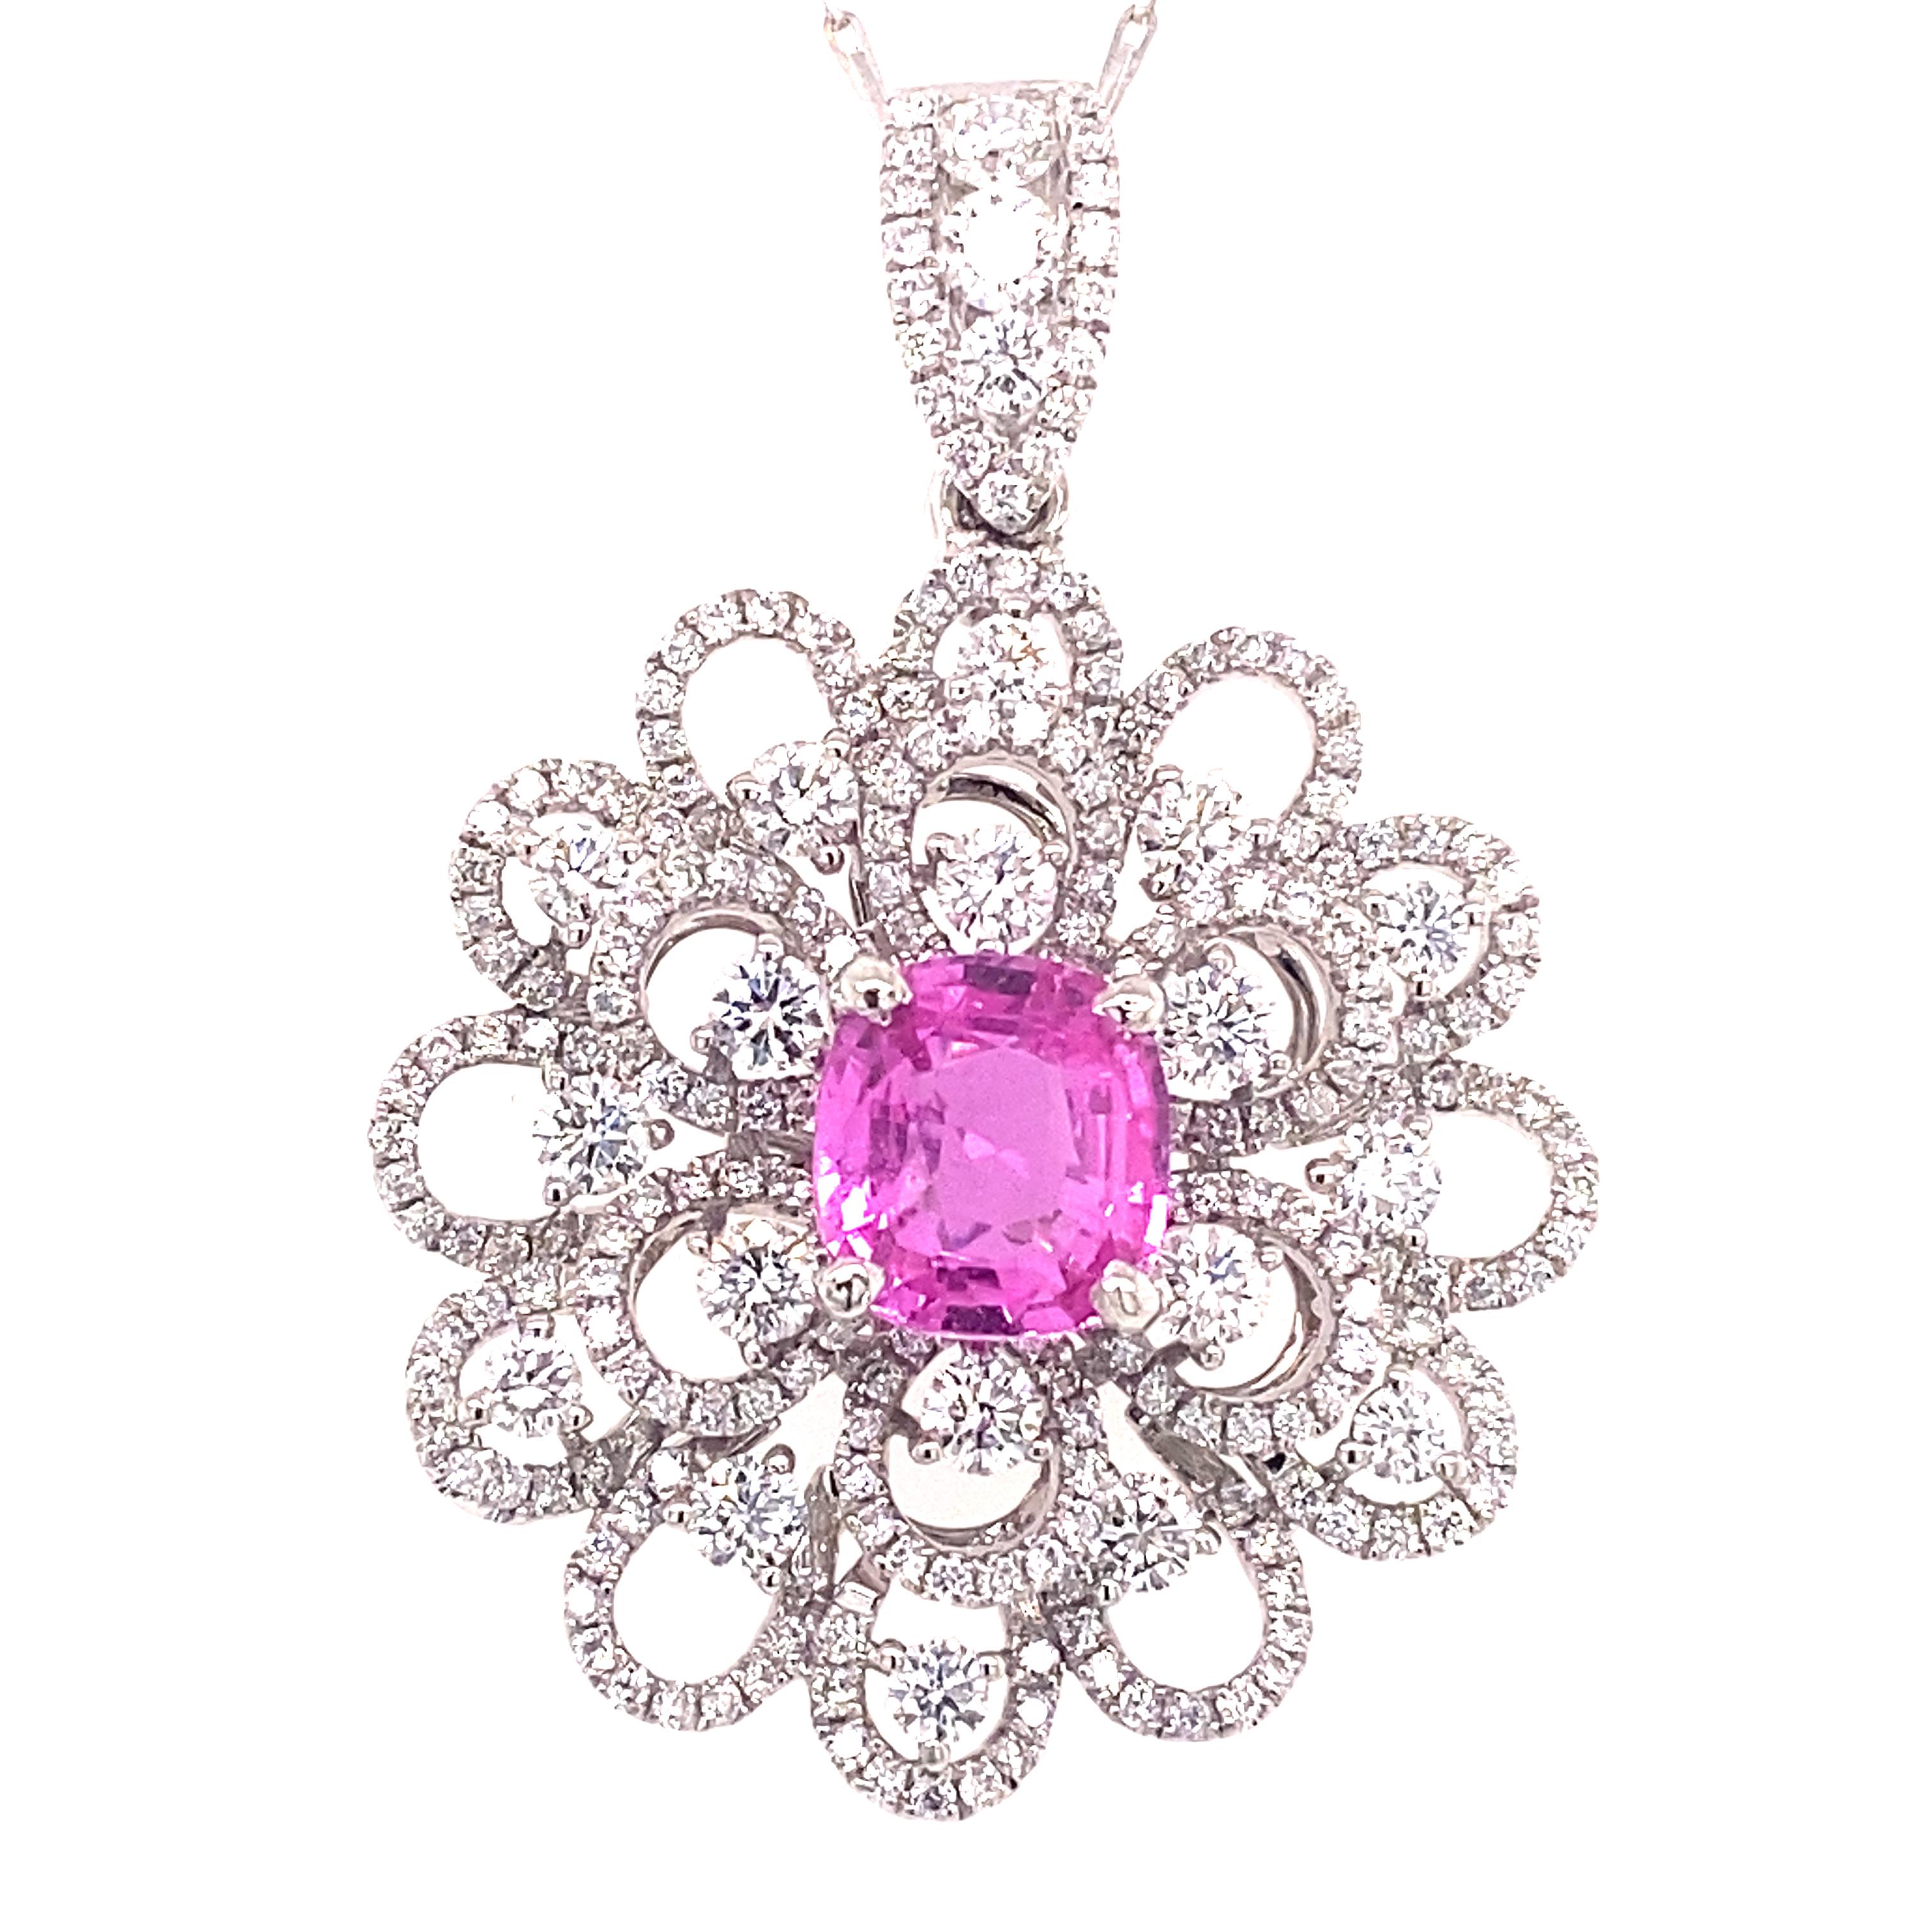 2.45 Carat GIA certified  cushion cut natural pink sapphire set in an 18k white gold floral pendant with 2.09 carats total weight of round brilliant diamonds. 16